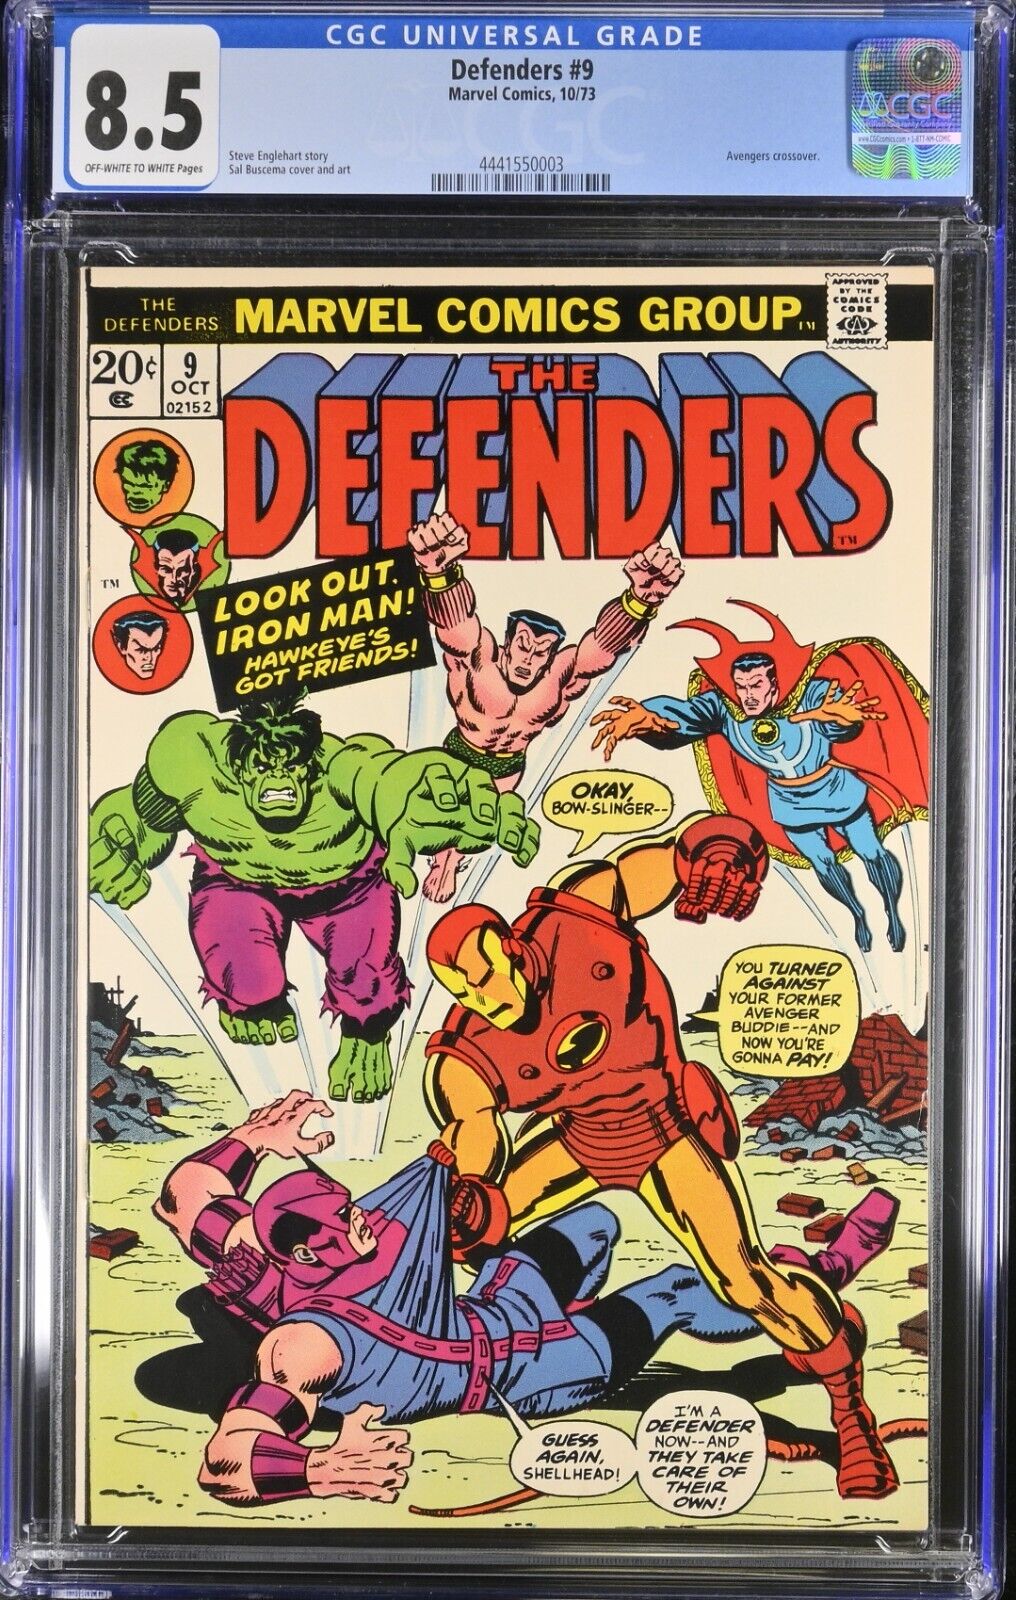 DEFENDERS #9 - CGC 8.5 - OW/WP - VF+ AVENGERS CROSSOVER